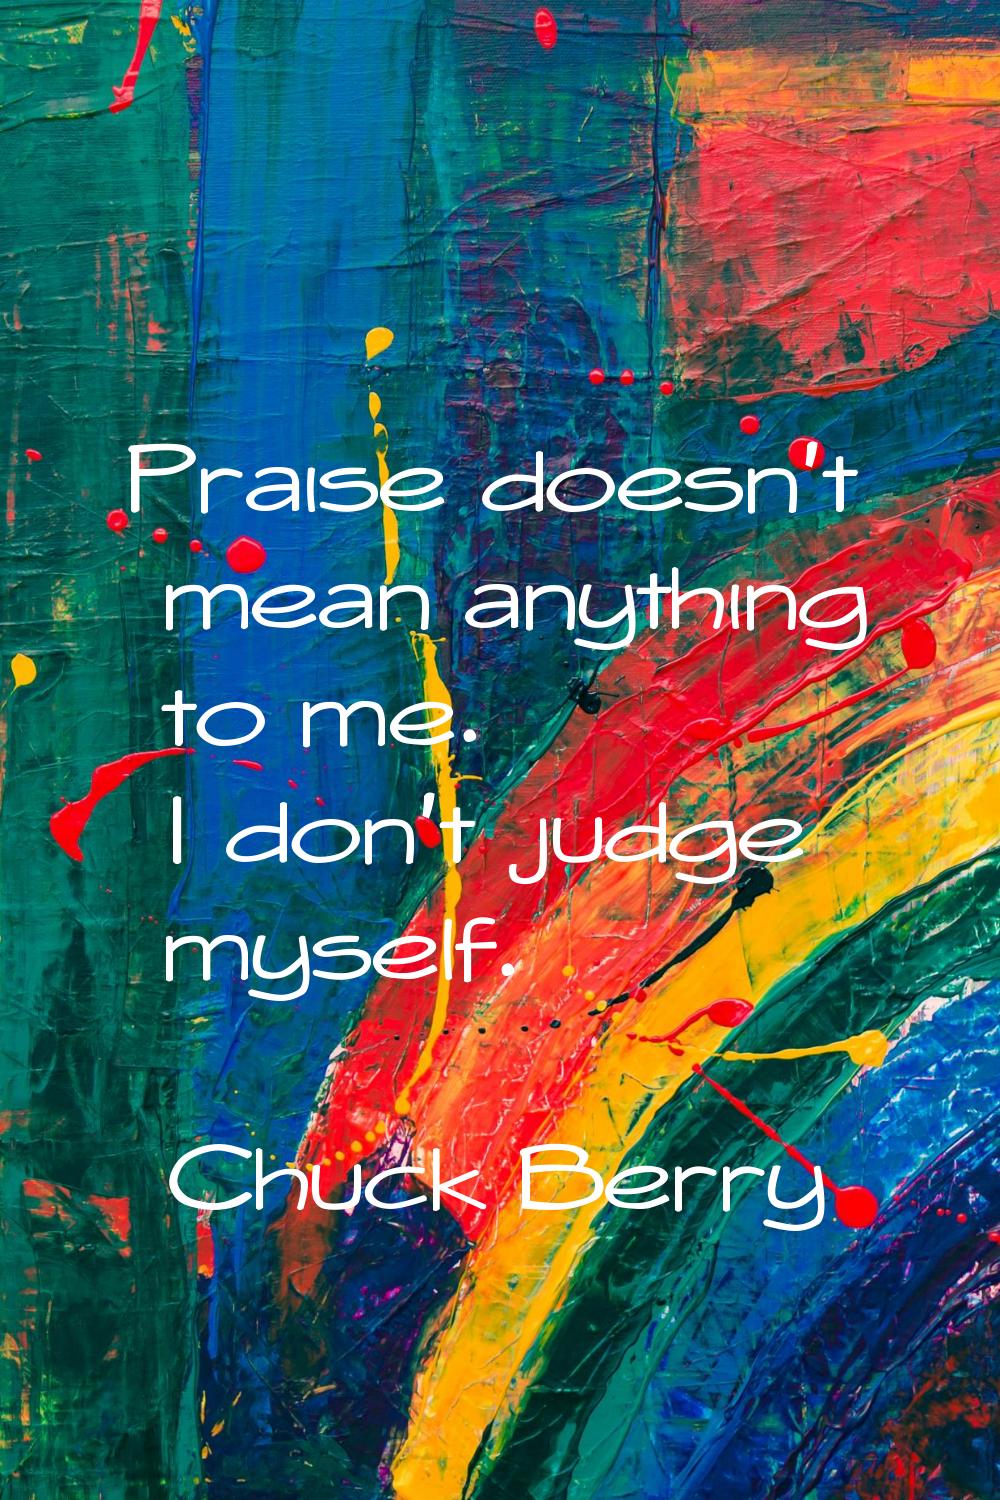 Praise doesn't mean anything to me. I don't judge myself.